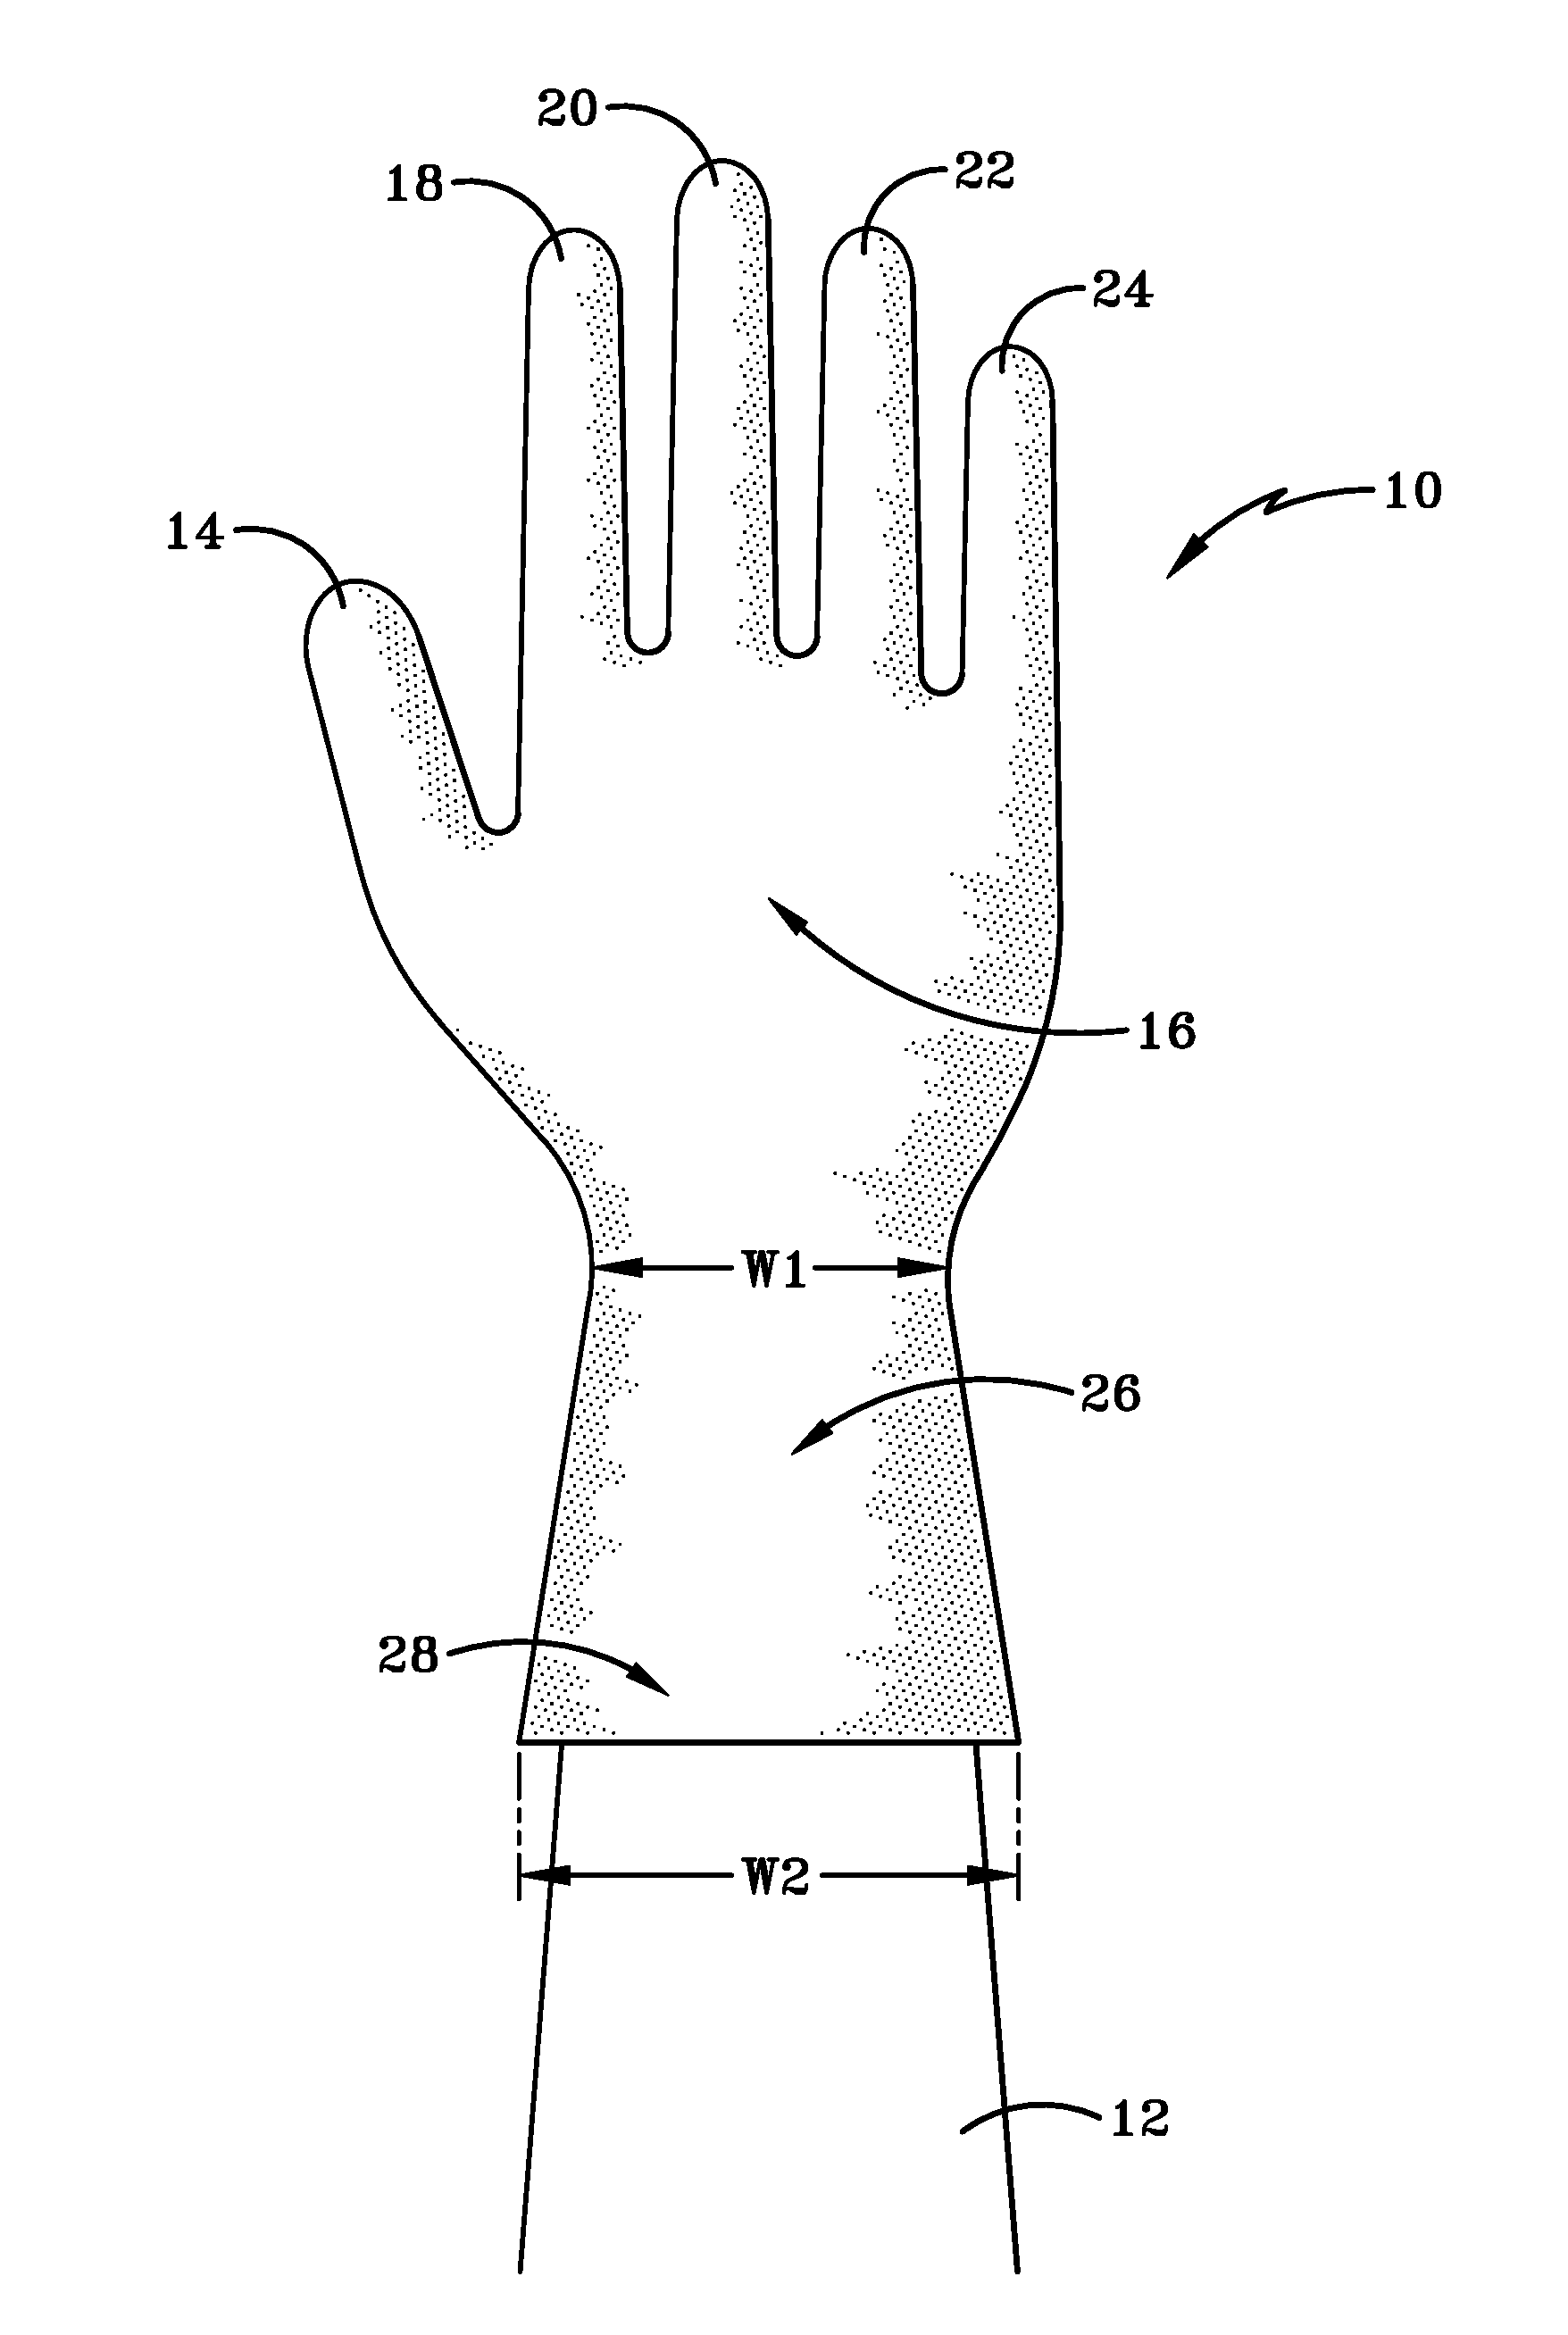 Glove having a widened cuff and with finger regions that include a flexible hinge region